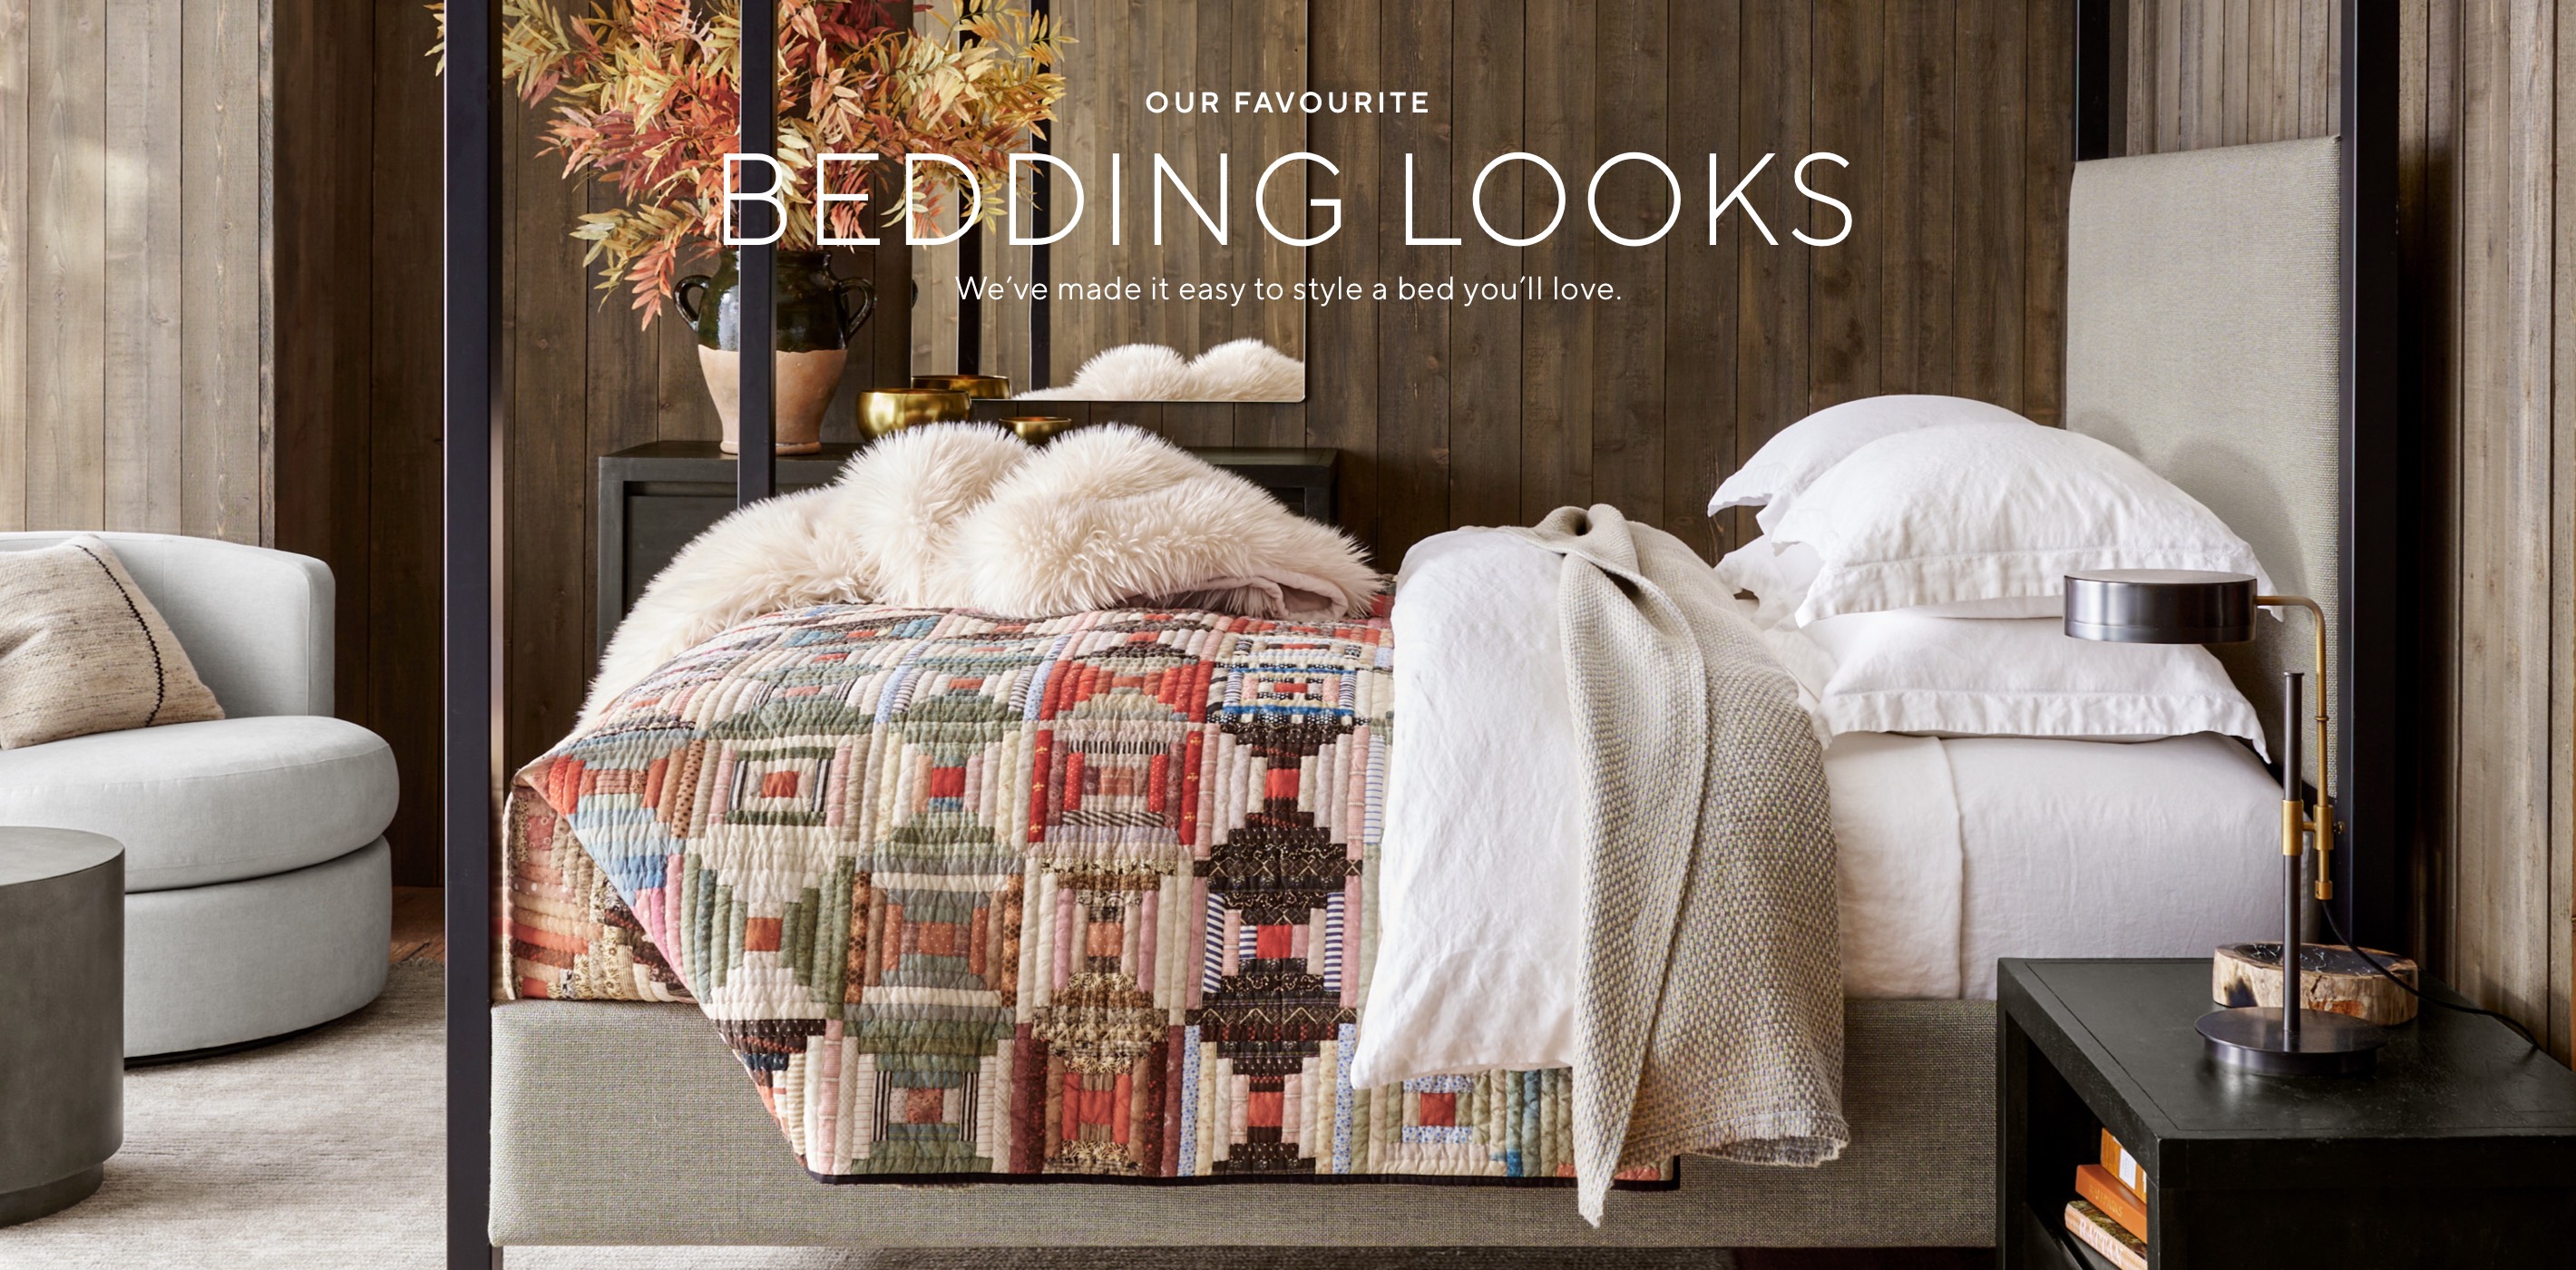 Our Favourite Bedding Looks